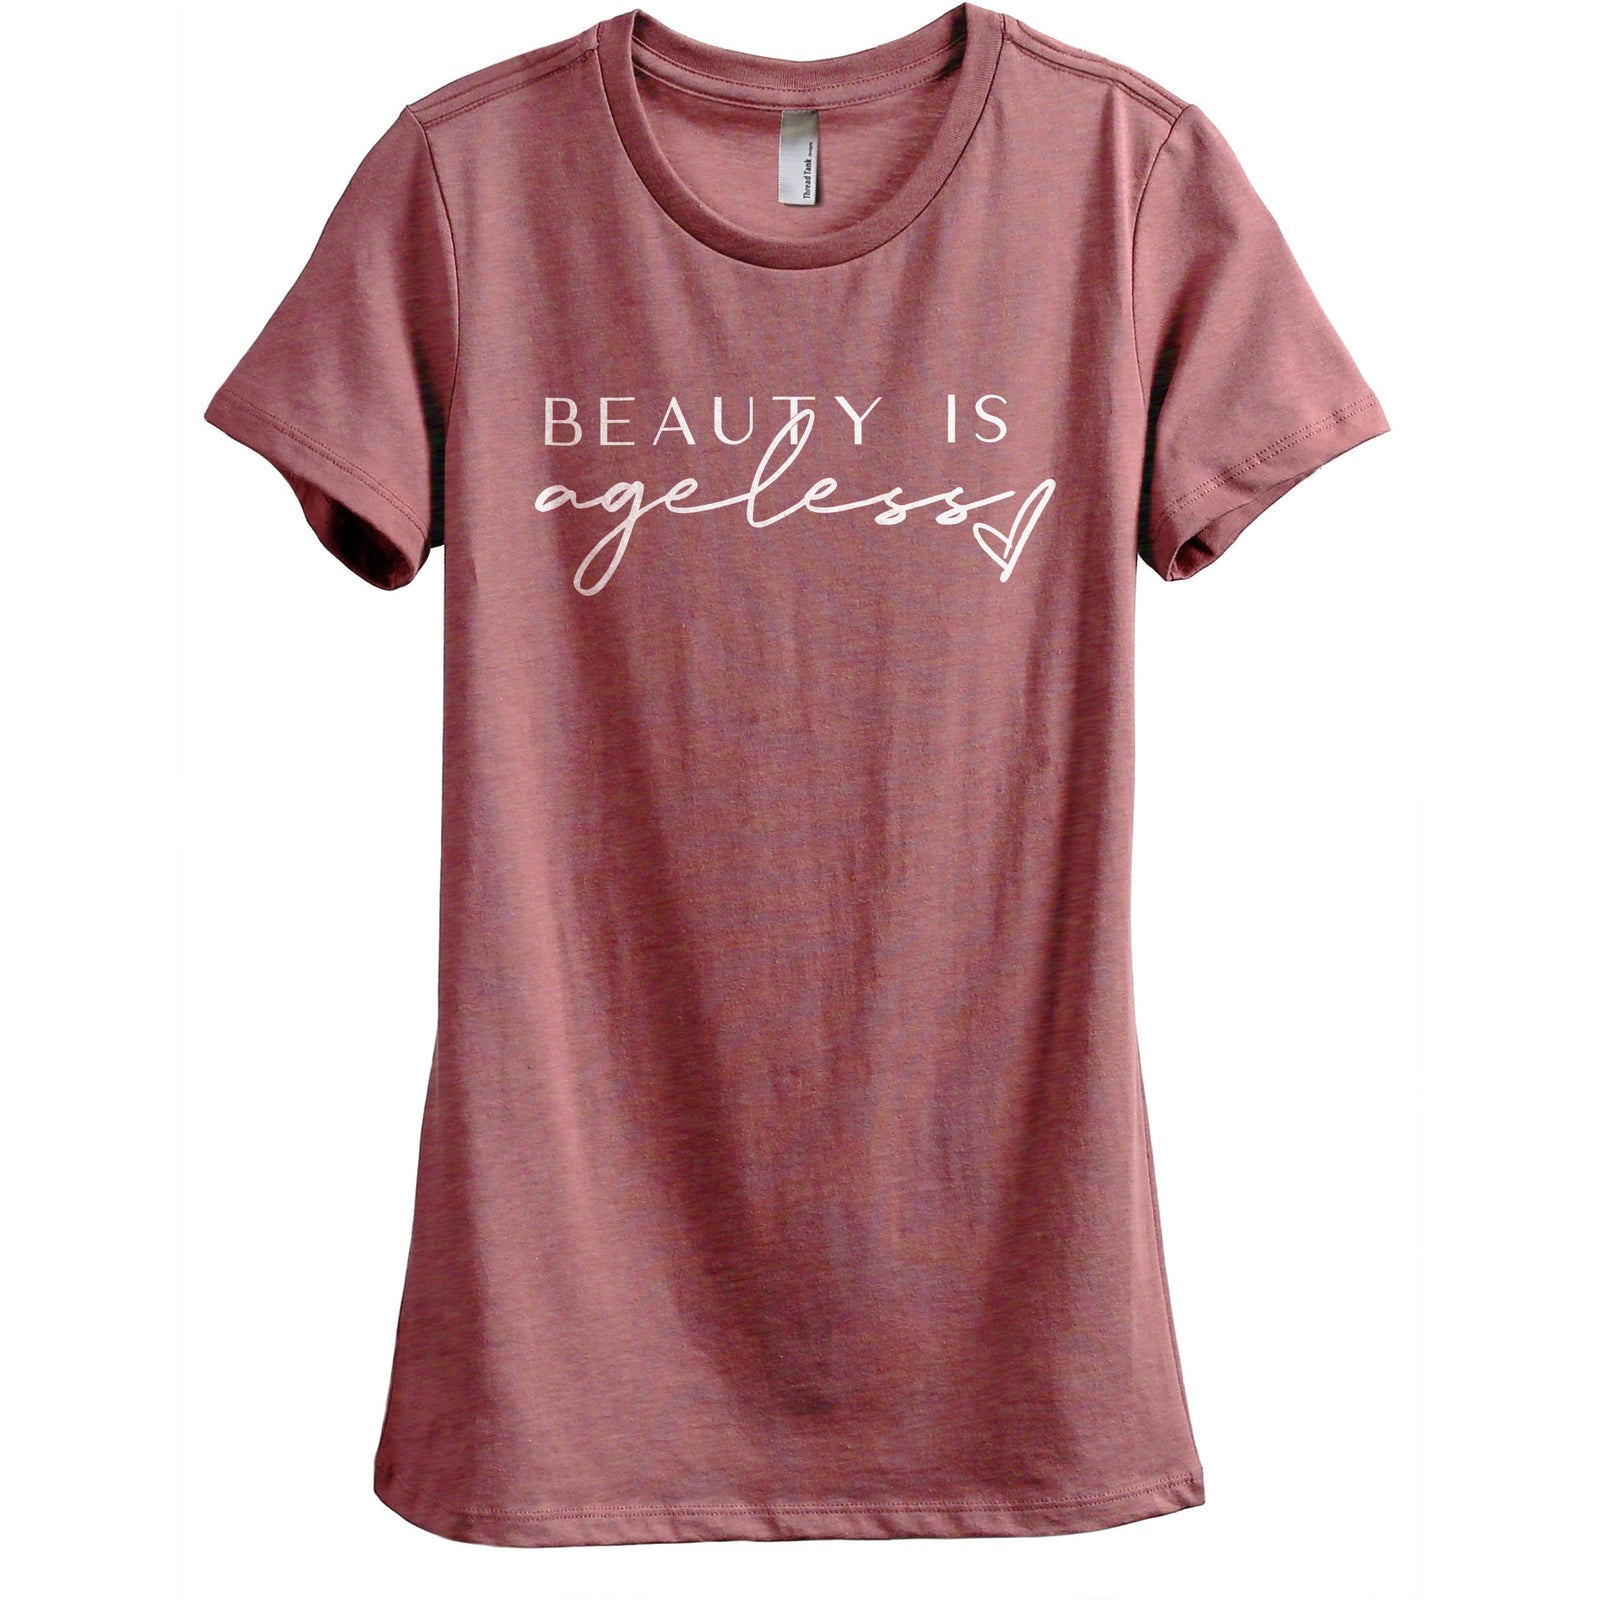 Beauty Is Ageless Women's Relaxed Crewneck Graphic T-Shirt Top Tee